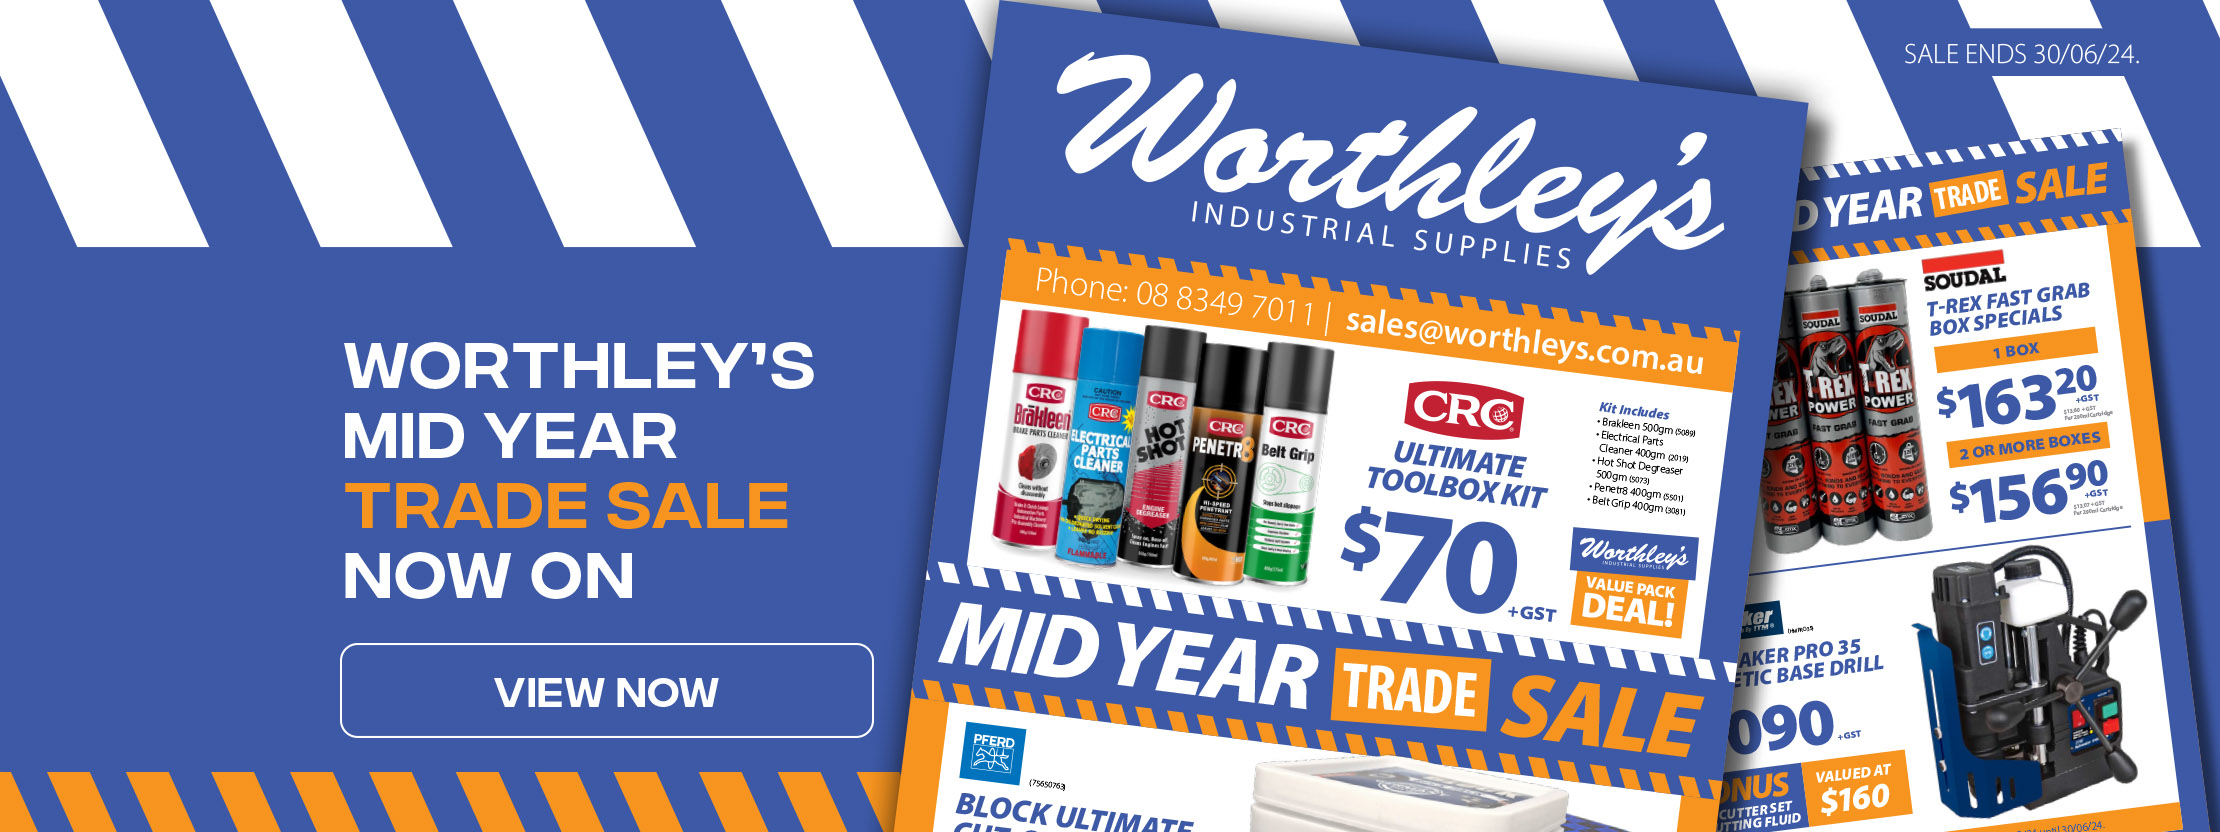 WORTHLEYS Catalogue Out Now banner May 2024 Promotion